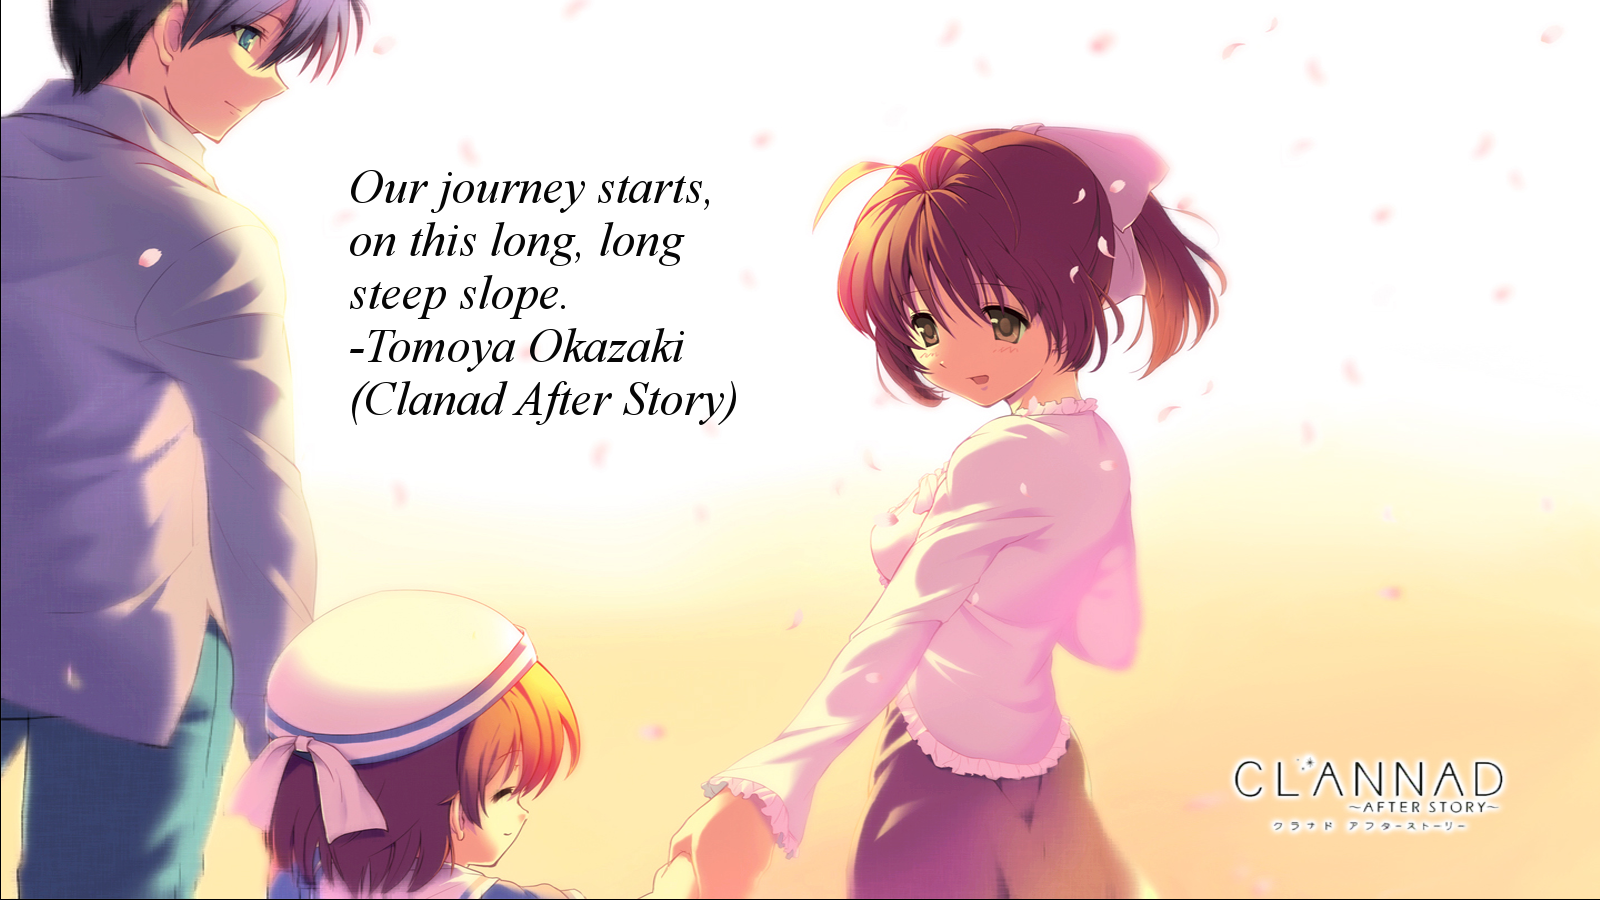 The 40 Best Clannad Quotes of All Time (With Images)